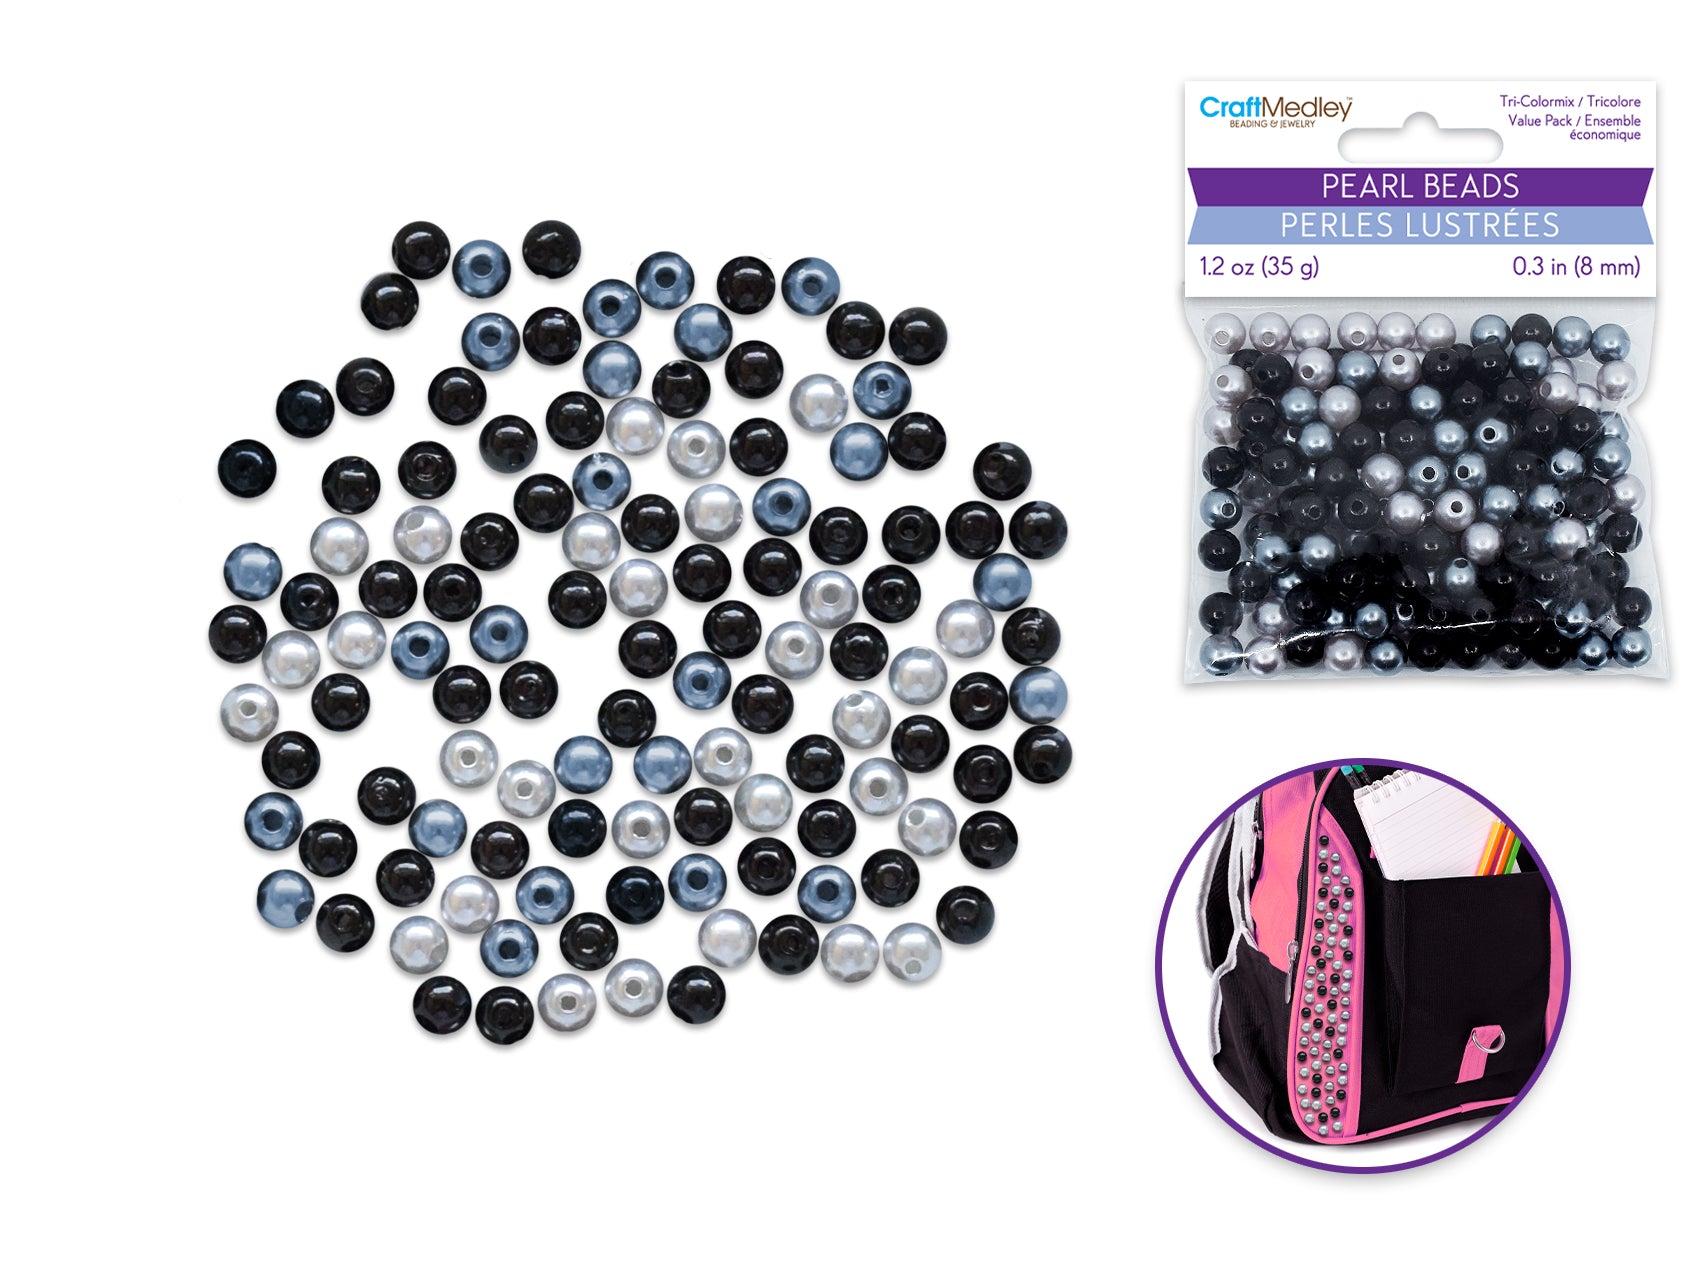 8mm Gloss Tri-Color Mix Pearl Beads, 35gms, Black